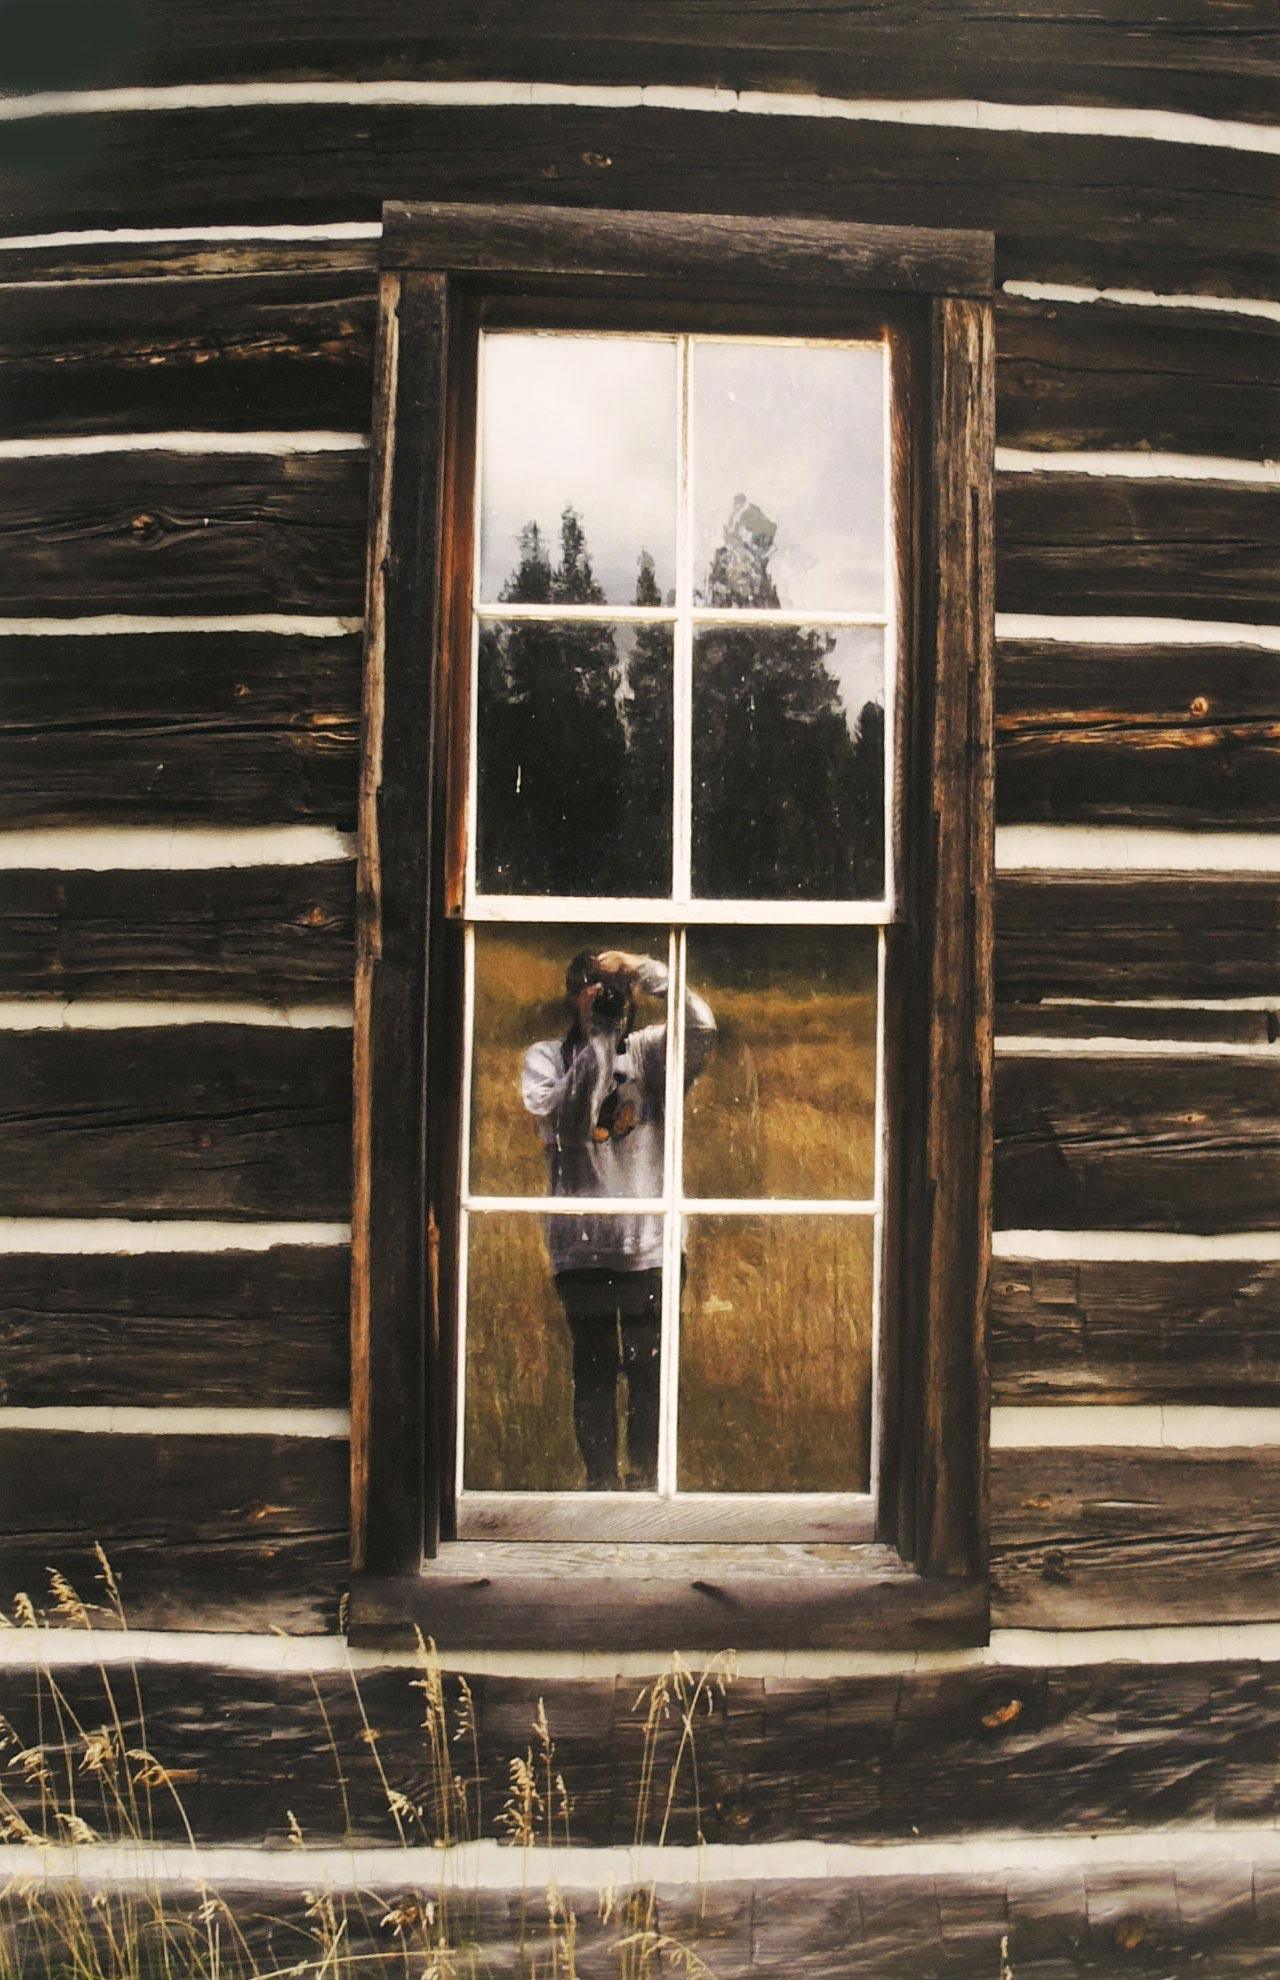 A photograph by Gabrielle Robinson of the photographer mirrored in the window of a log cabin